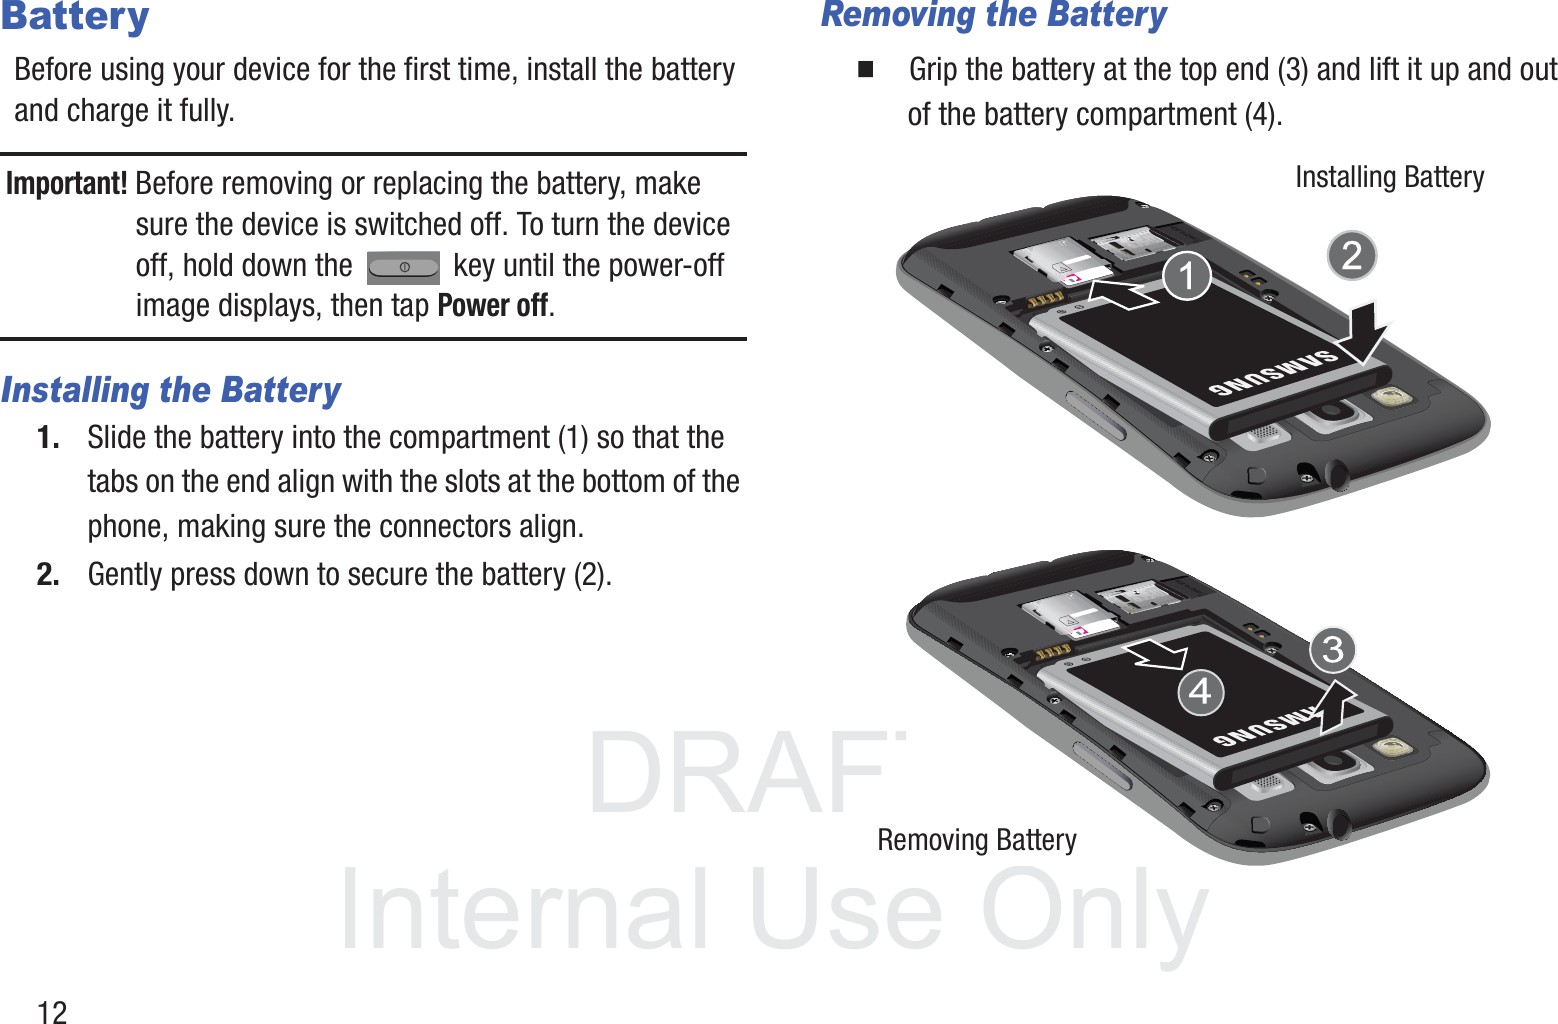 DRAFT InternalUse Only12BatteryBefore using your device for the first time, install the battery and charge it fully.Important! Before removing or replacing the battery, make sure the device is switched off. To turn the device off, hold down the   key until the power-off image displays, then tap Power off.Installing the Battery1. Slide the battery into the compartment (1) so that the tabs on the end align with the slots at the bottom of the phone, making sure the connectors align. 2. Gently press down to secure the battery (2).Removing the Battery䡲  Grip the battery at the top end (3) and lift it up and out of the battery compartment (4). Installing BatteryRemoving Battery